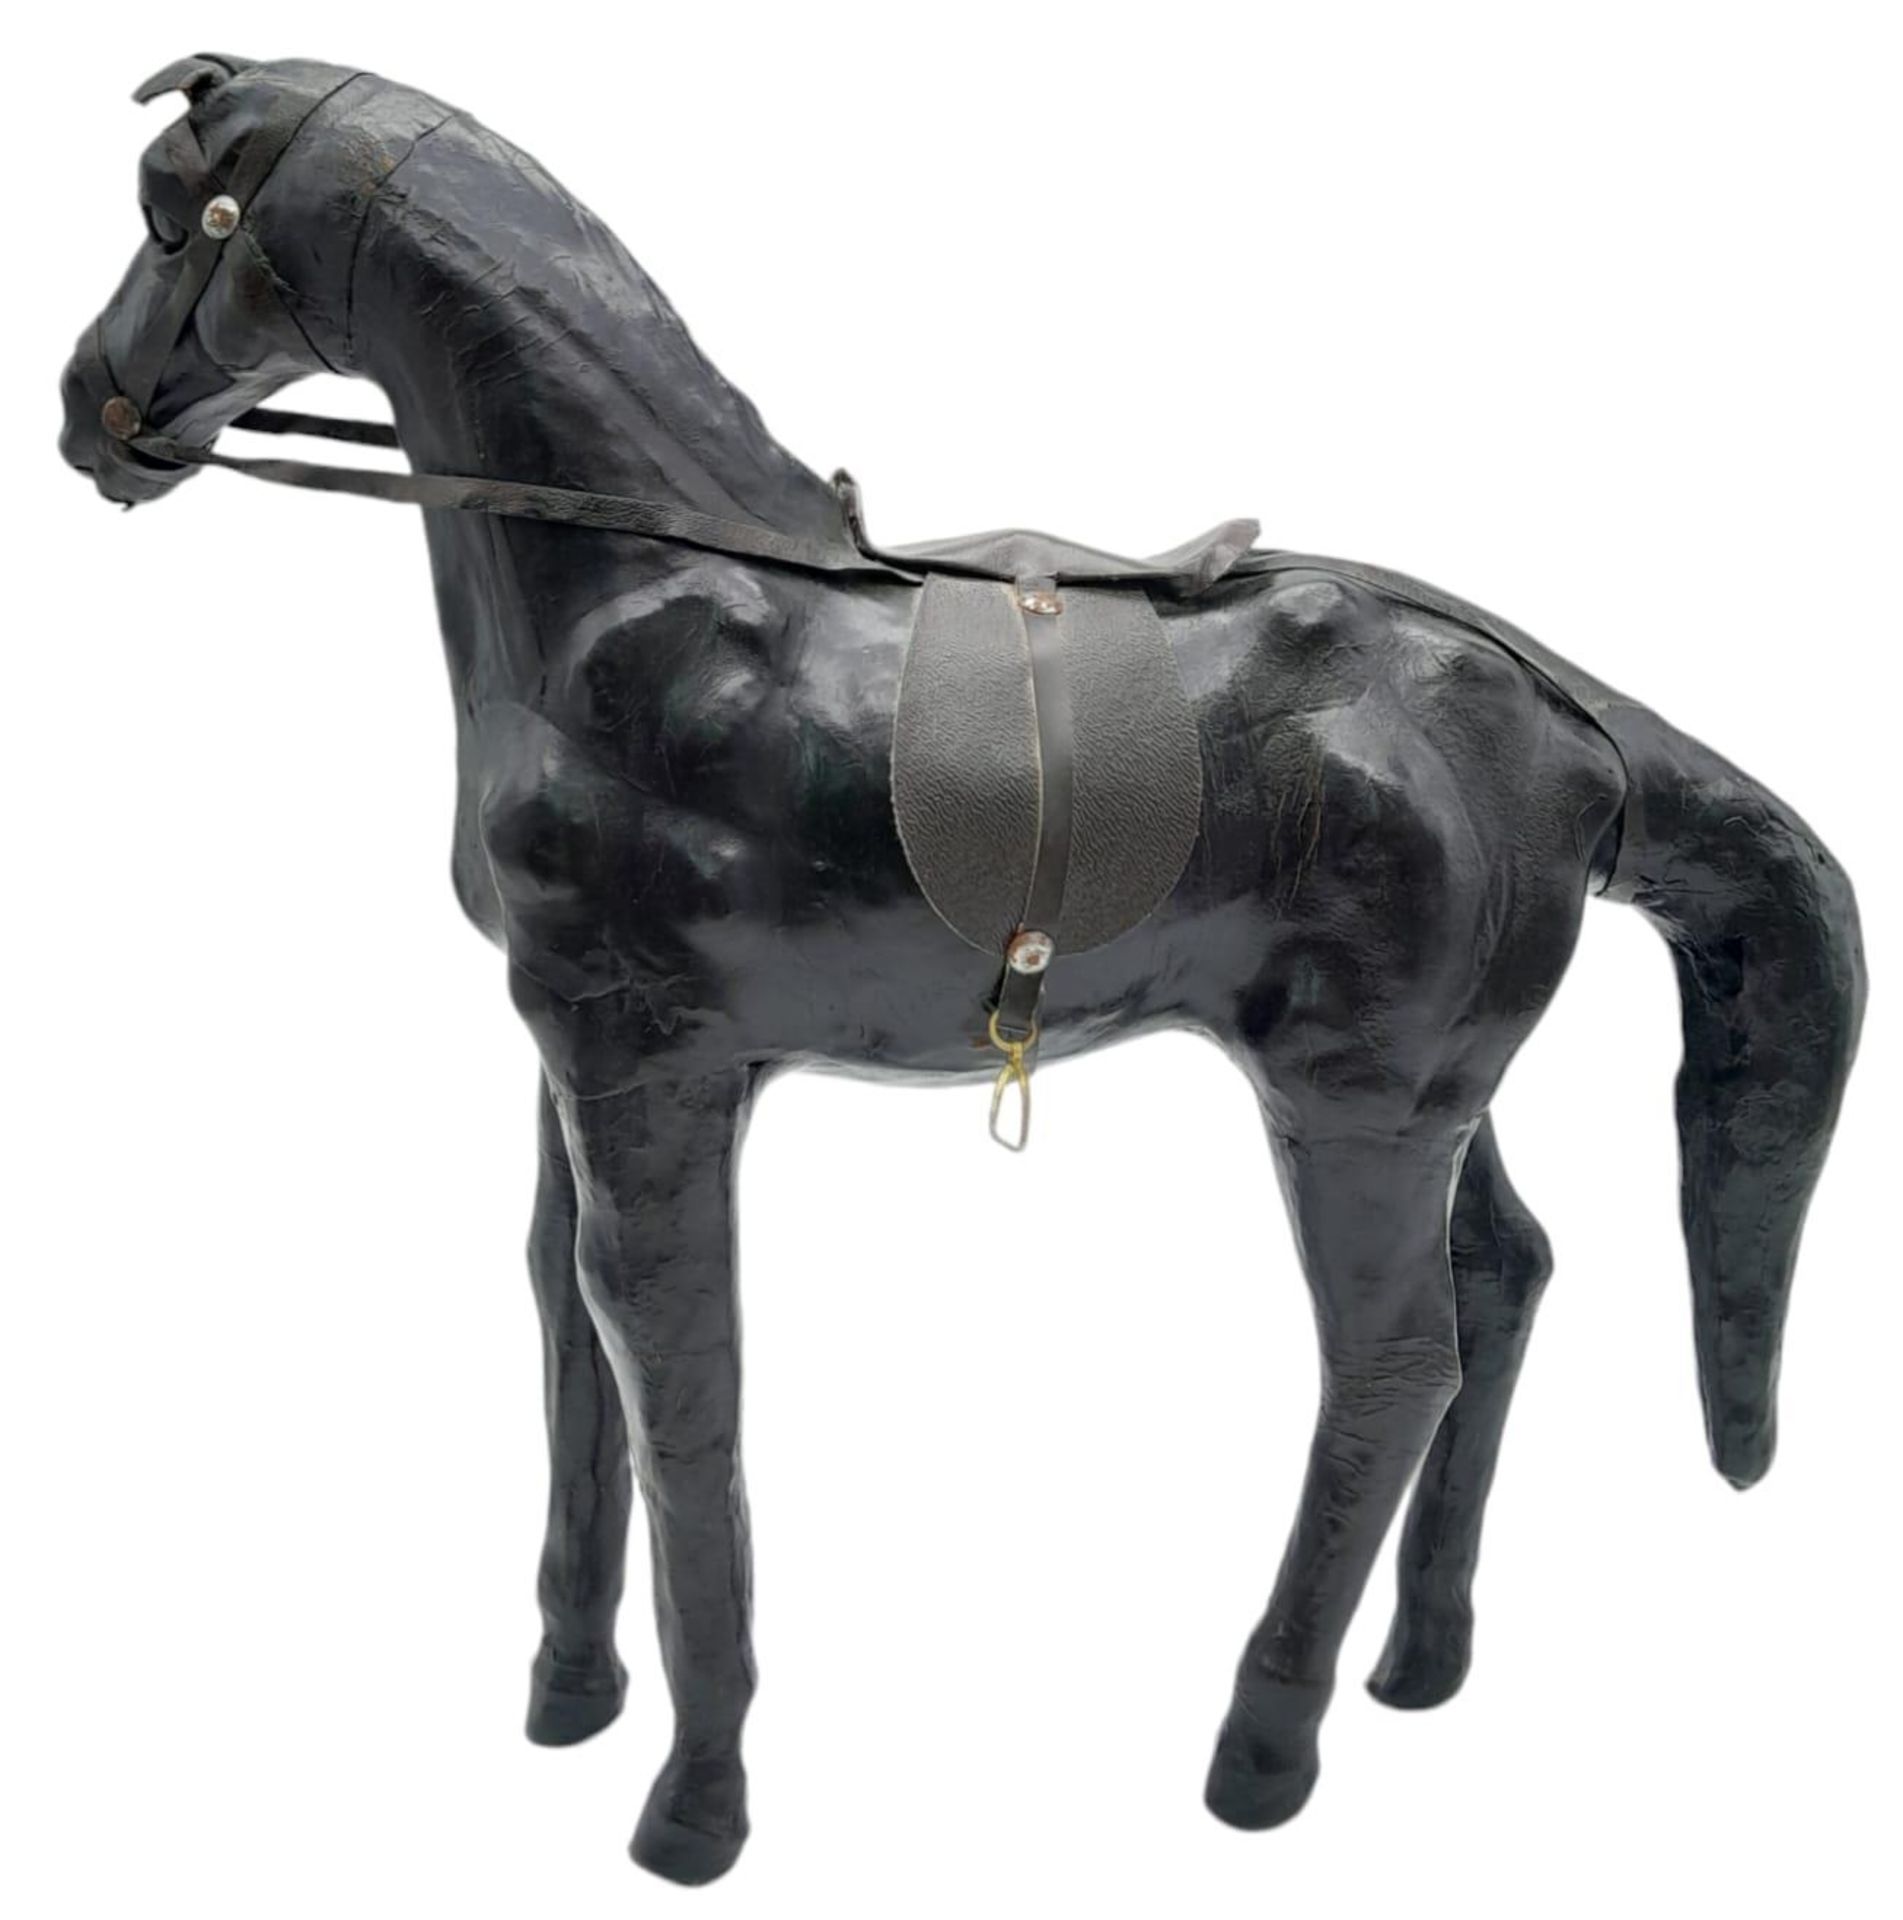 A Vintage Leather Liberty Style Leather Horse - Probably made by Liberty's in the 1960s. Amazing - Image 2 of 6